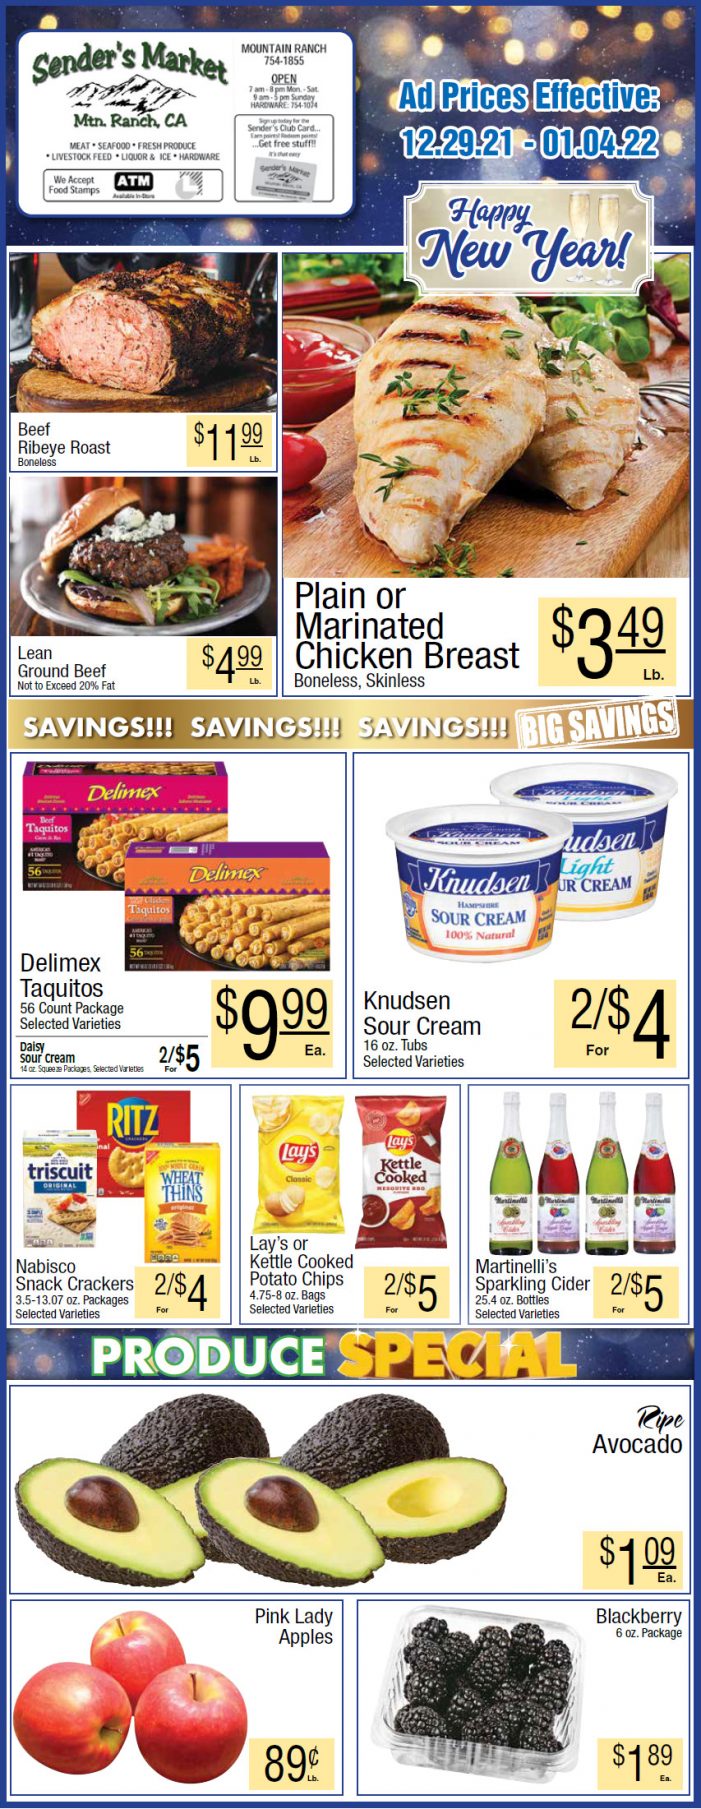 Sender’s Market’s Weekly Ad & Grocery Specials Through December 28th! Shop Local & Save!